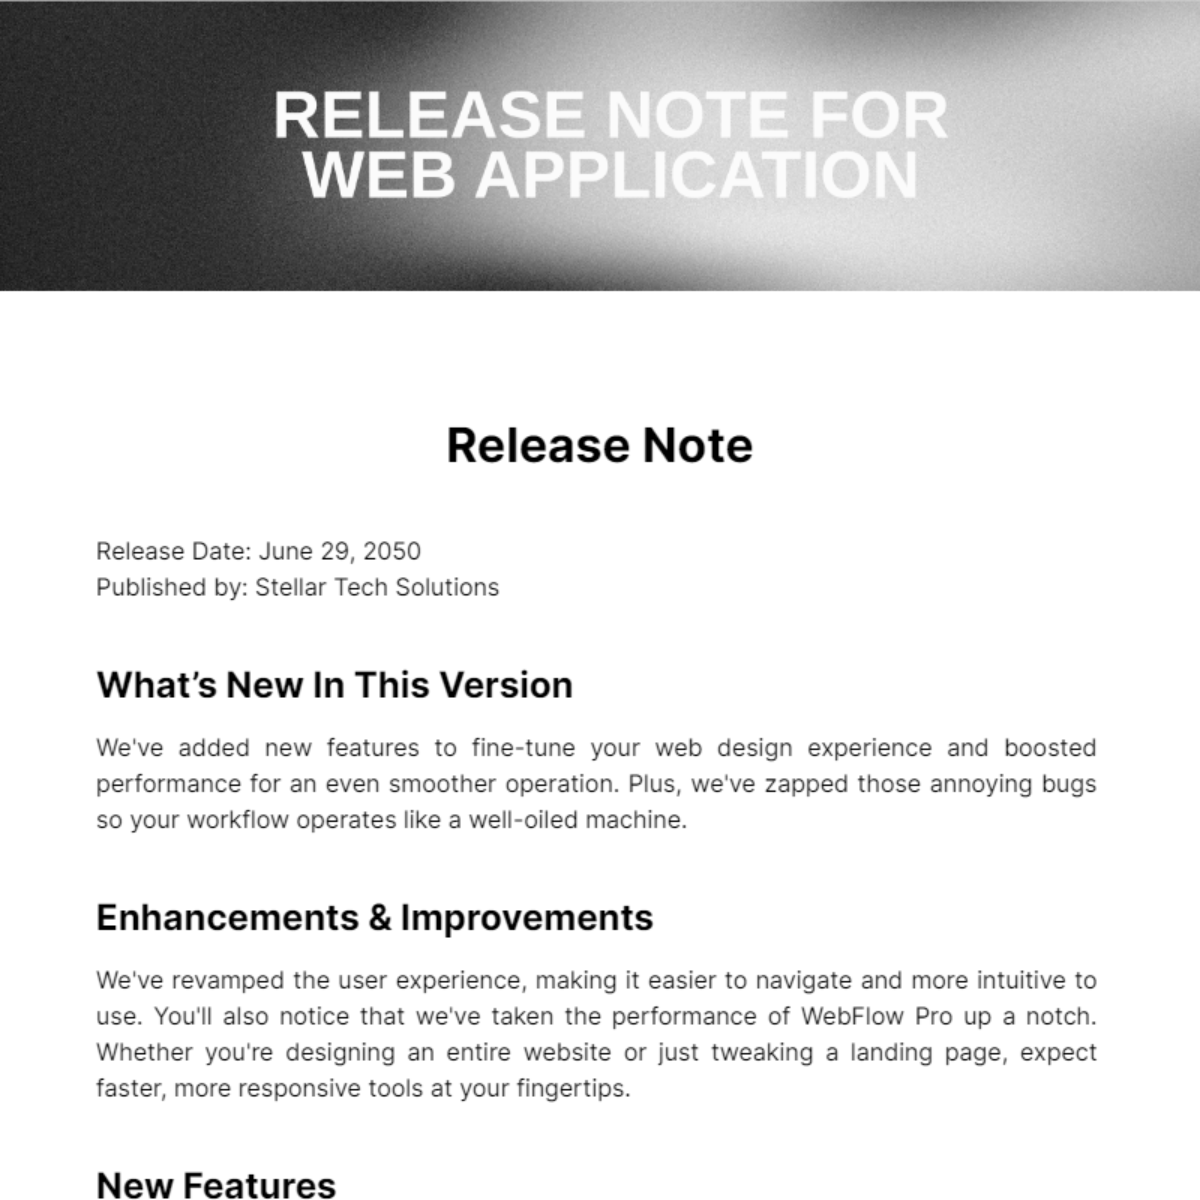 Release Note For Web Application Template